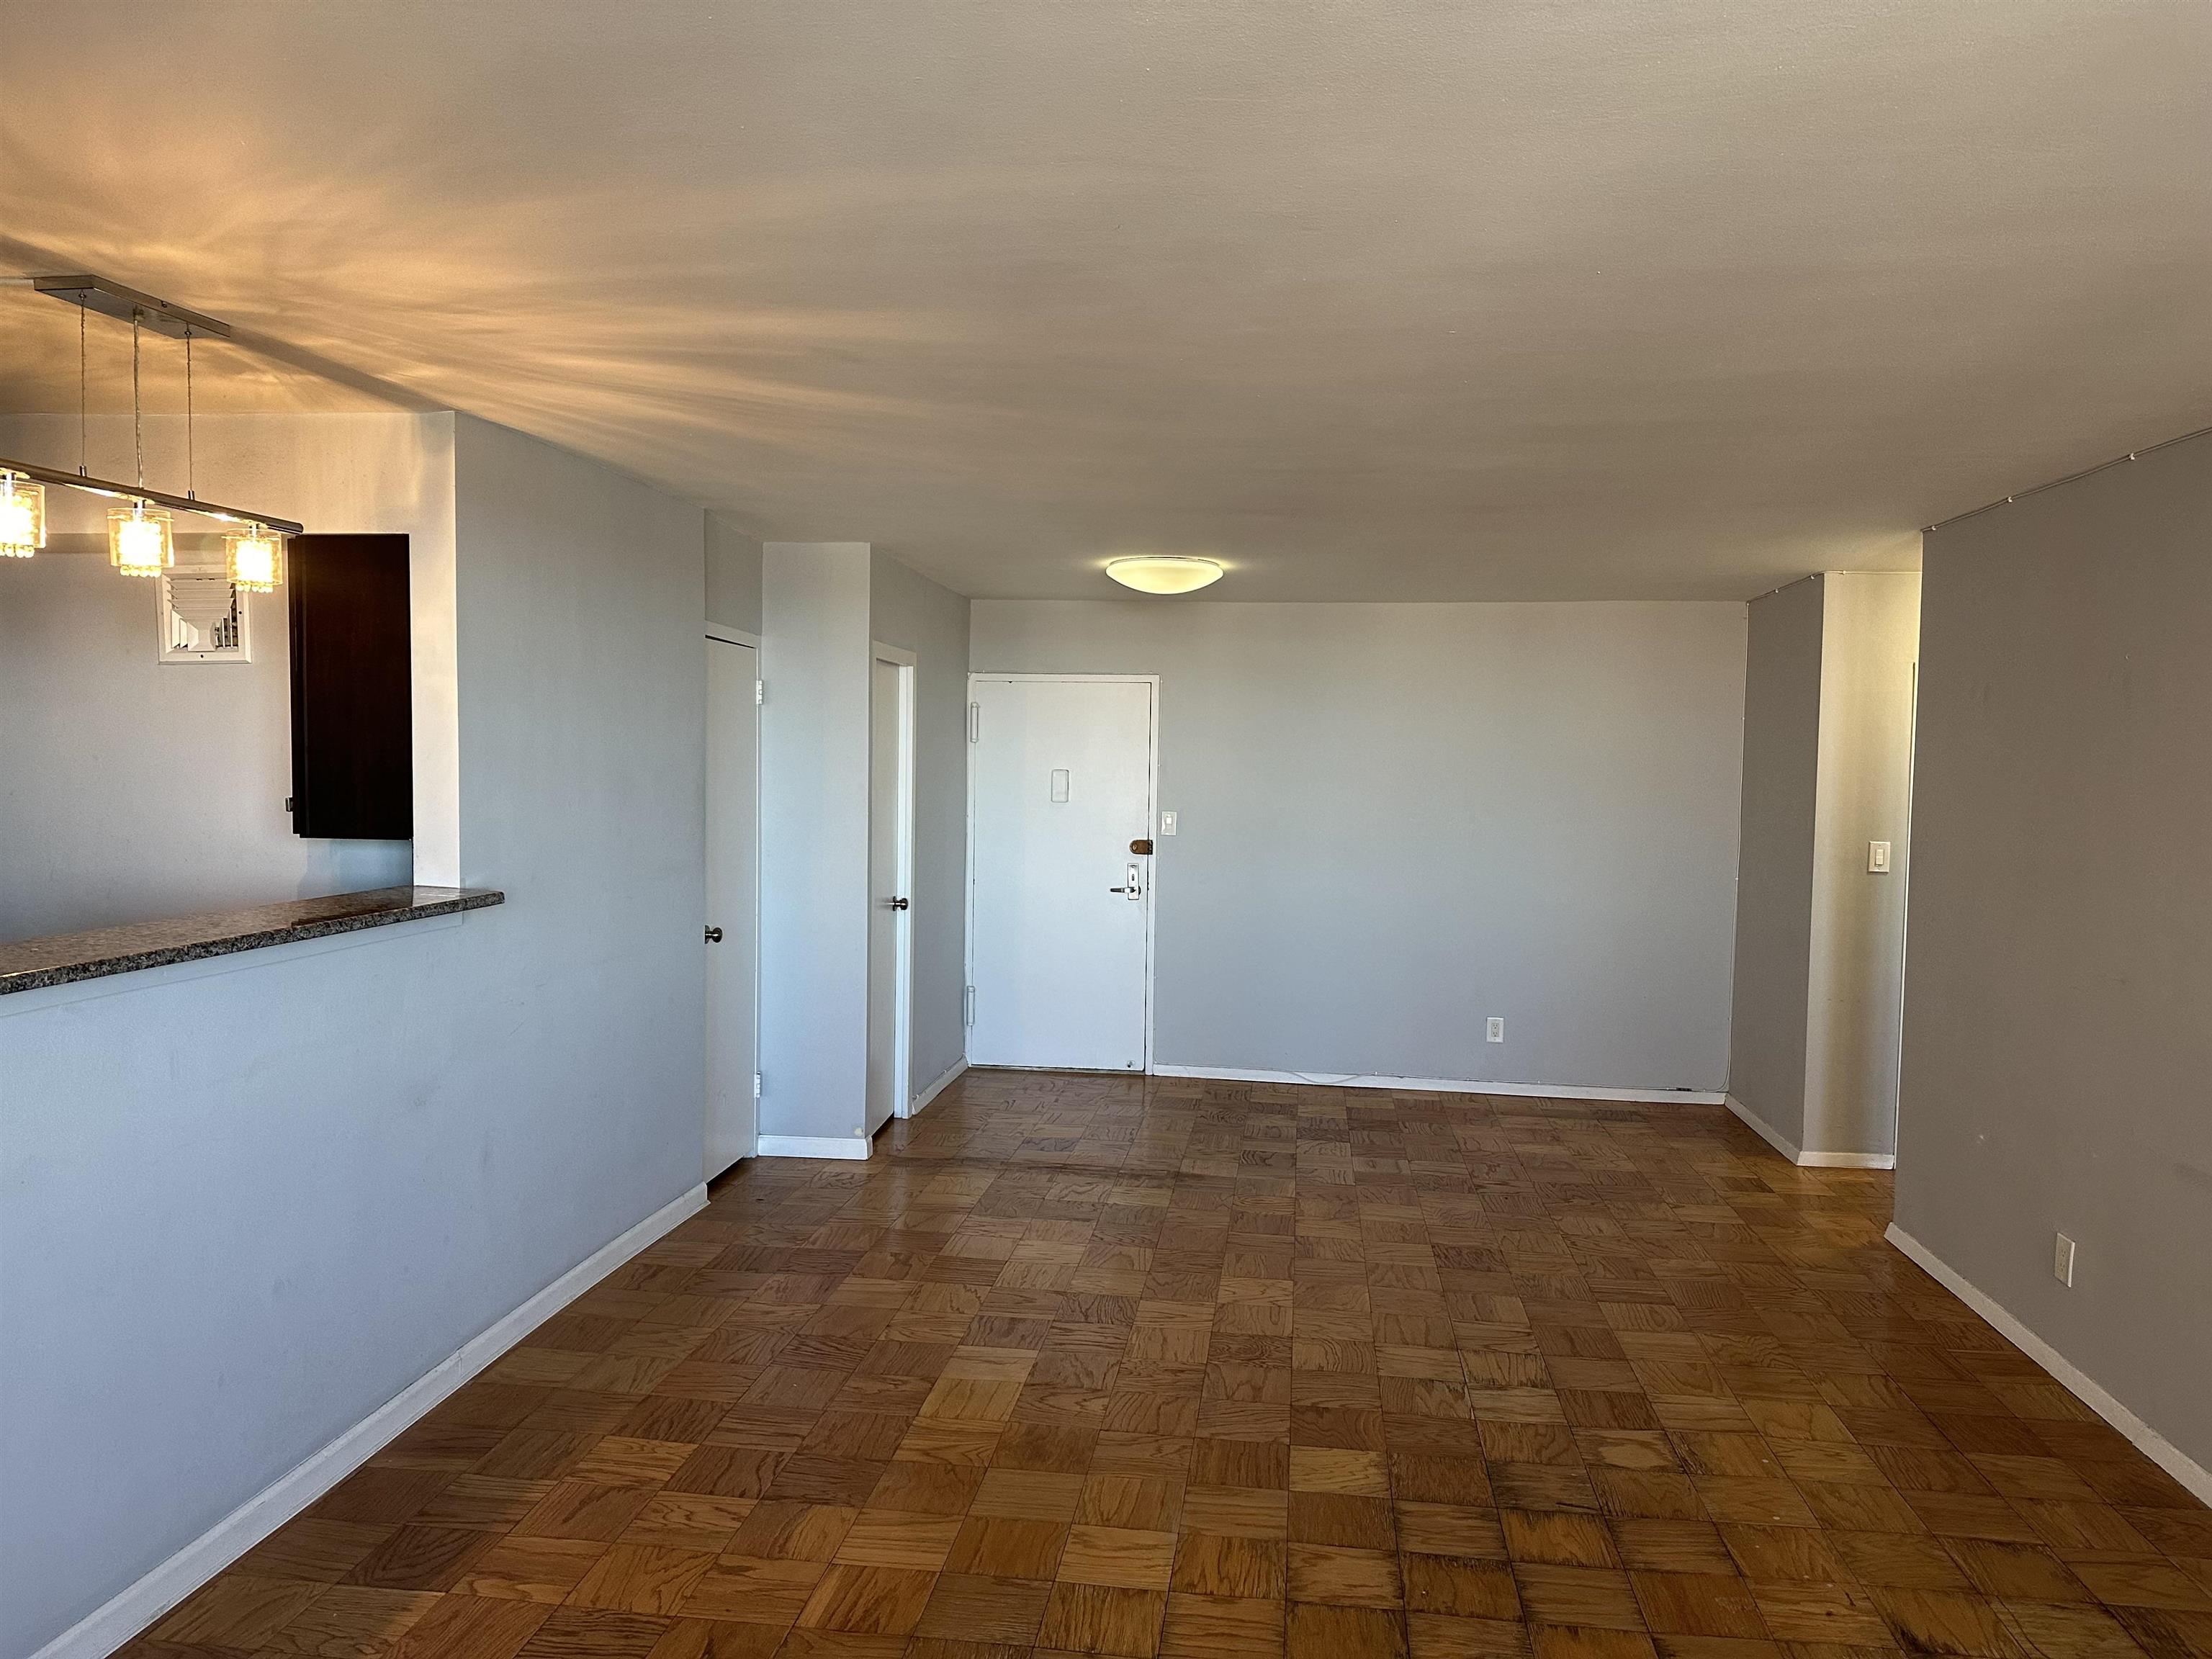 # 240002186 - For Rent in West New York NJ